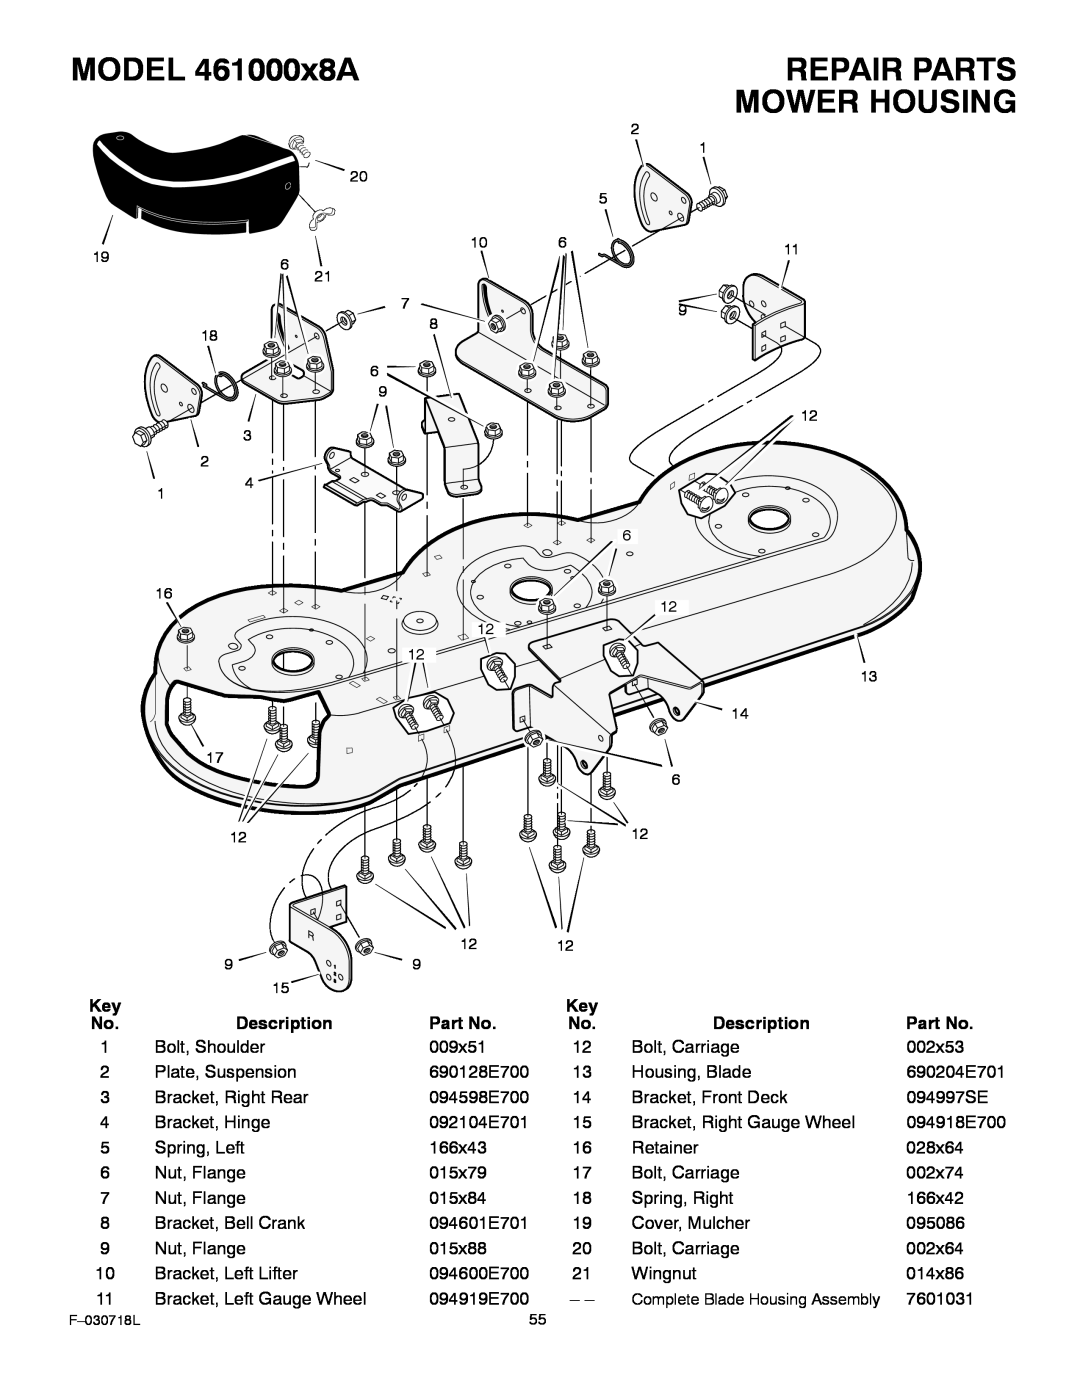 Murray manual Mower Housing, MODEL 461000x8A, Repair Parts, Complete Blade Housing Assembly 